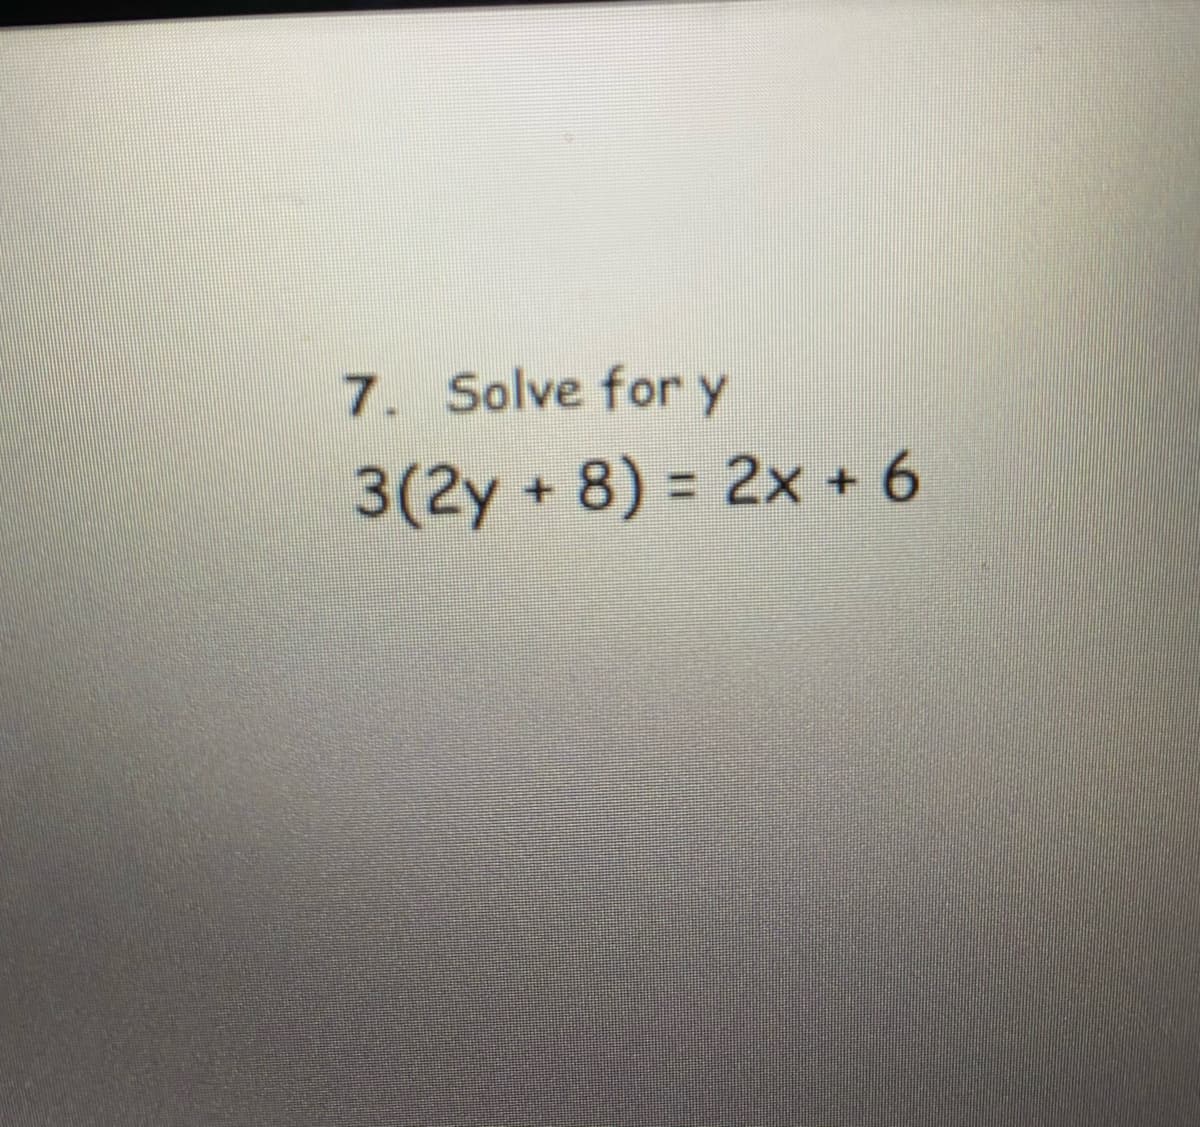 7. Solve for y
3(2y+8) = 2x + 6
